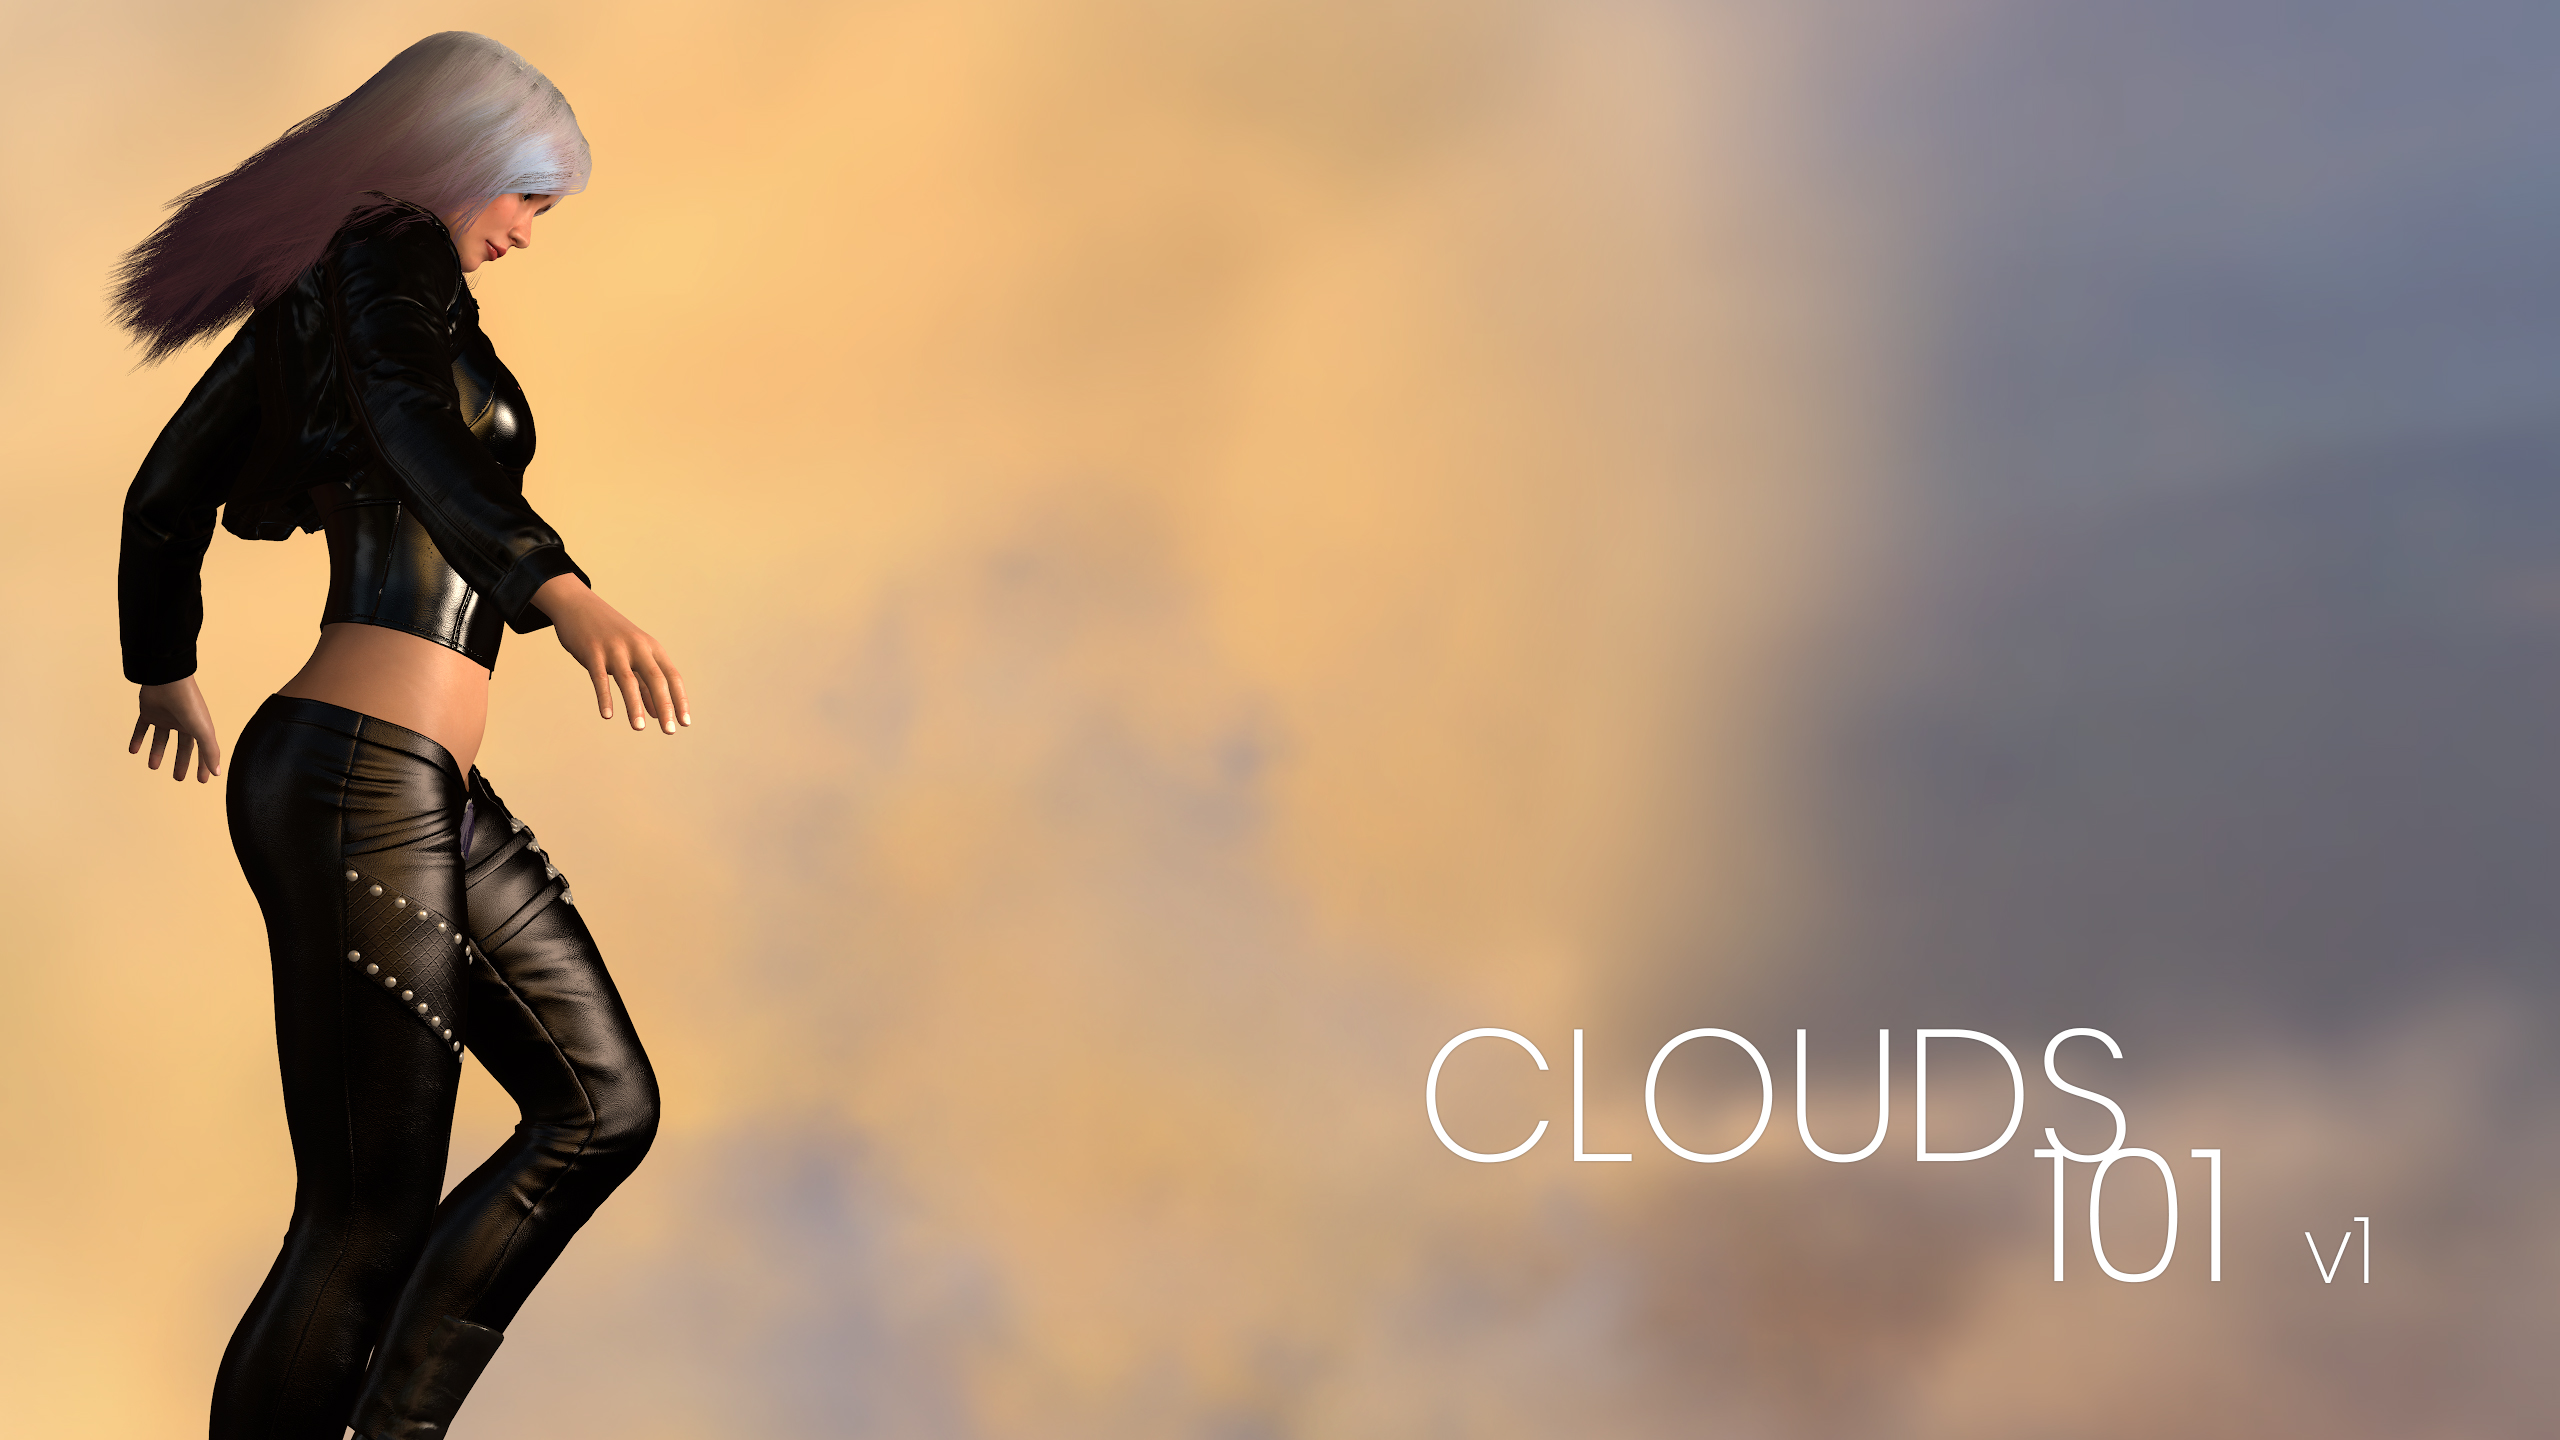 clouds-oneoone-title.jpg